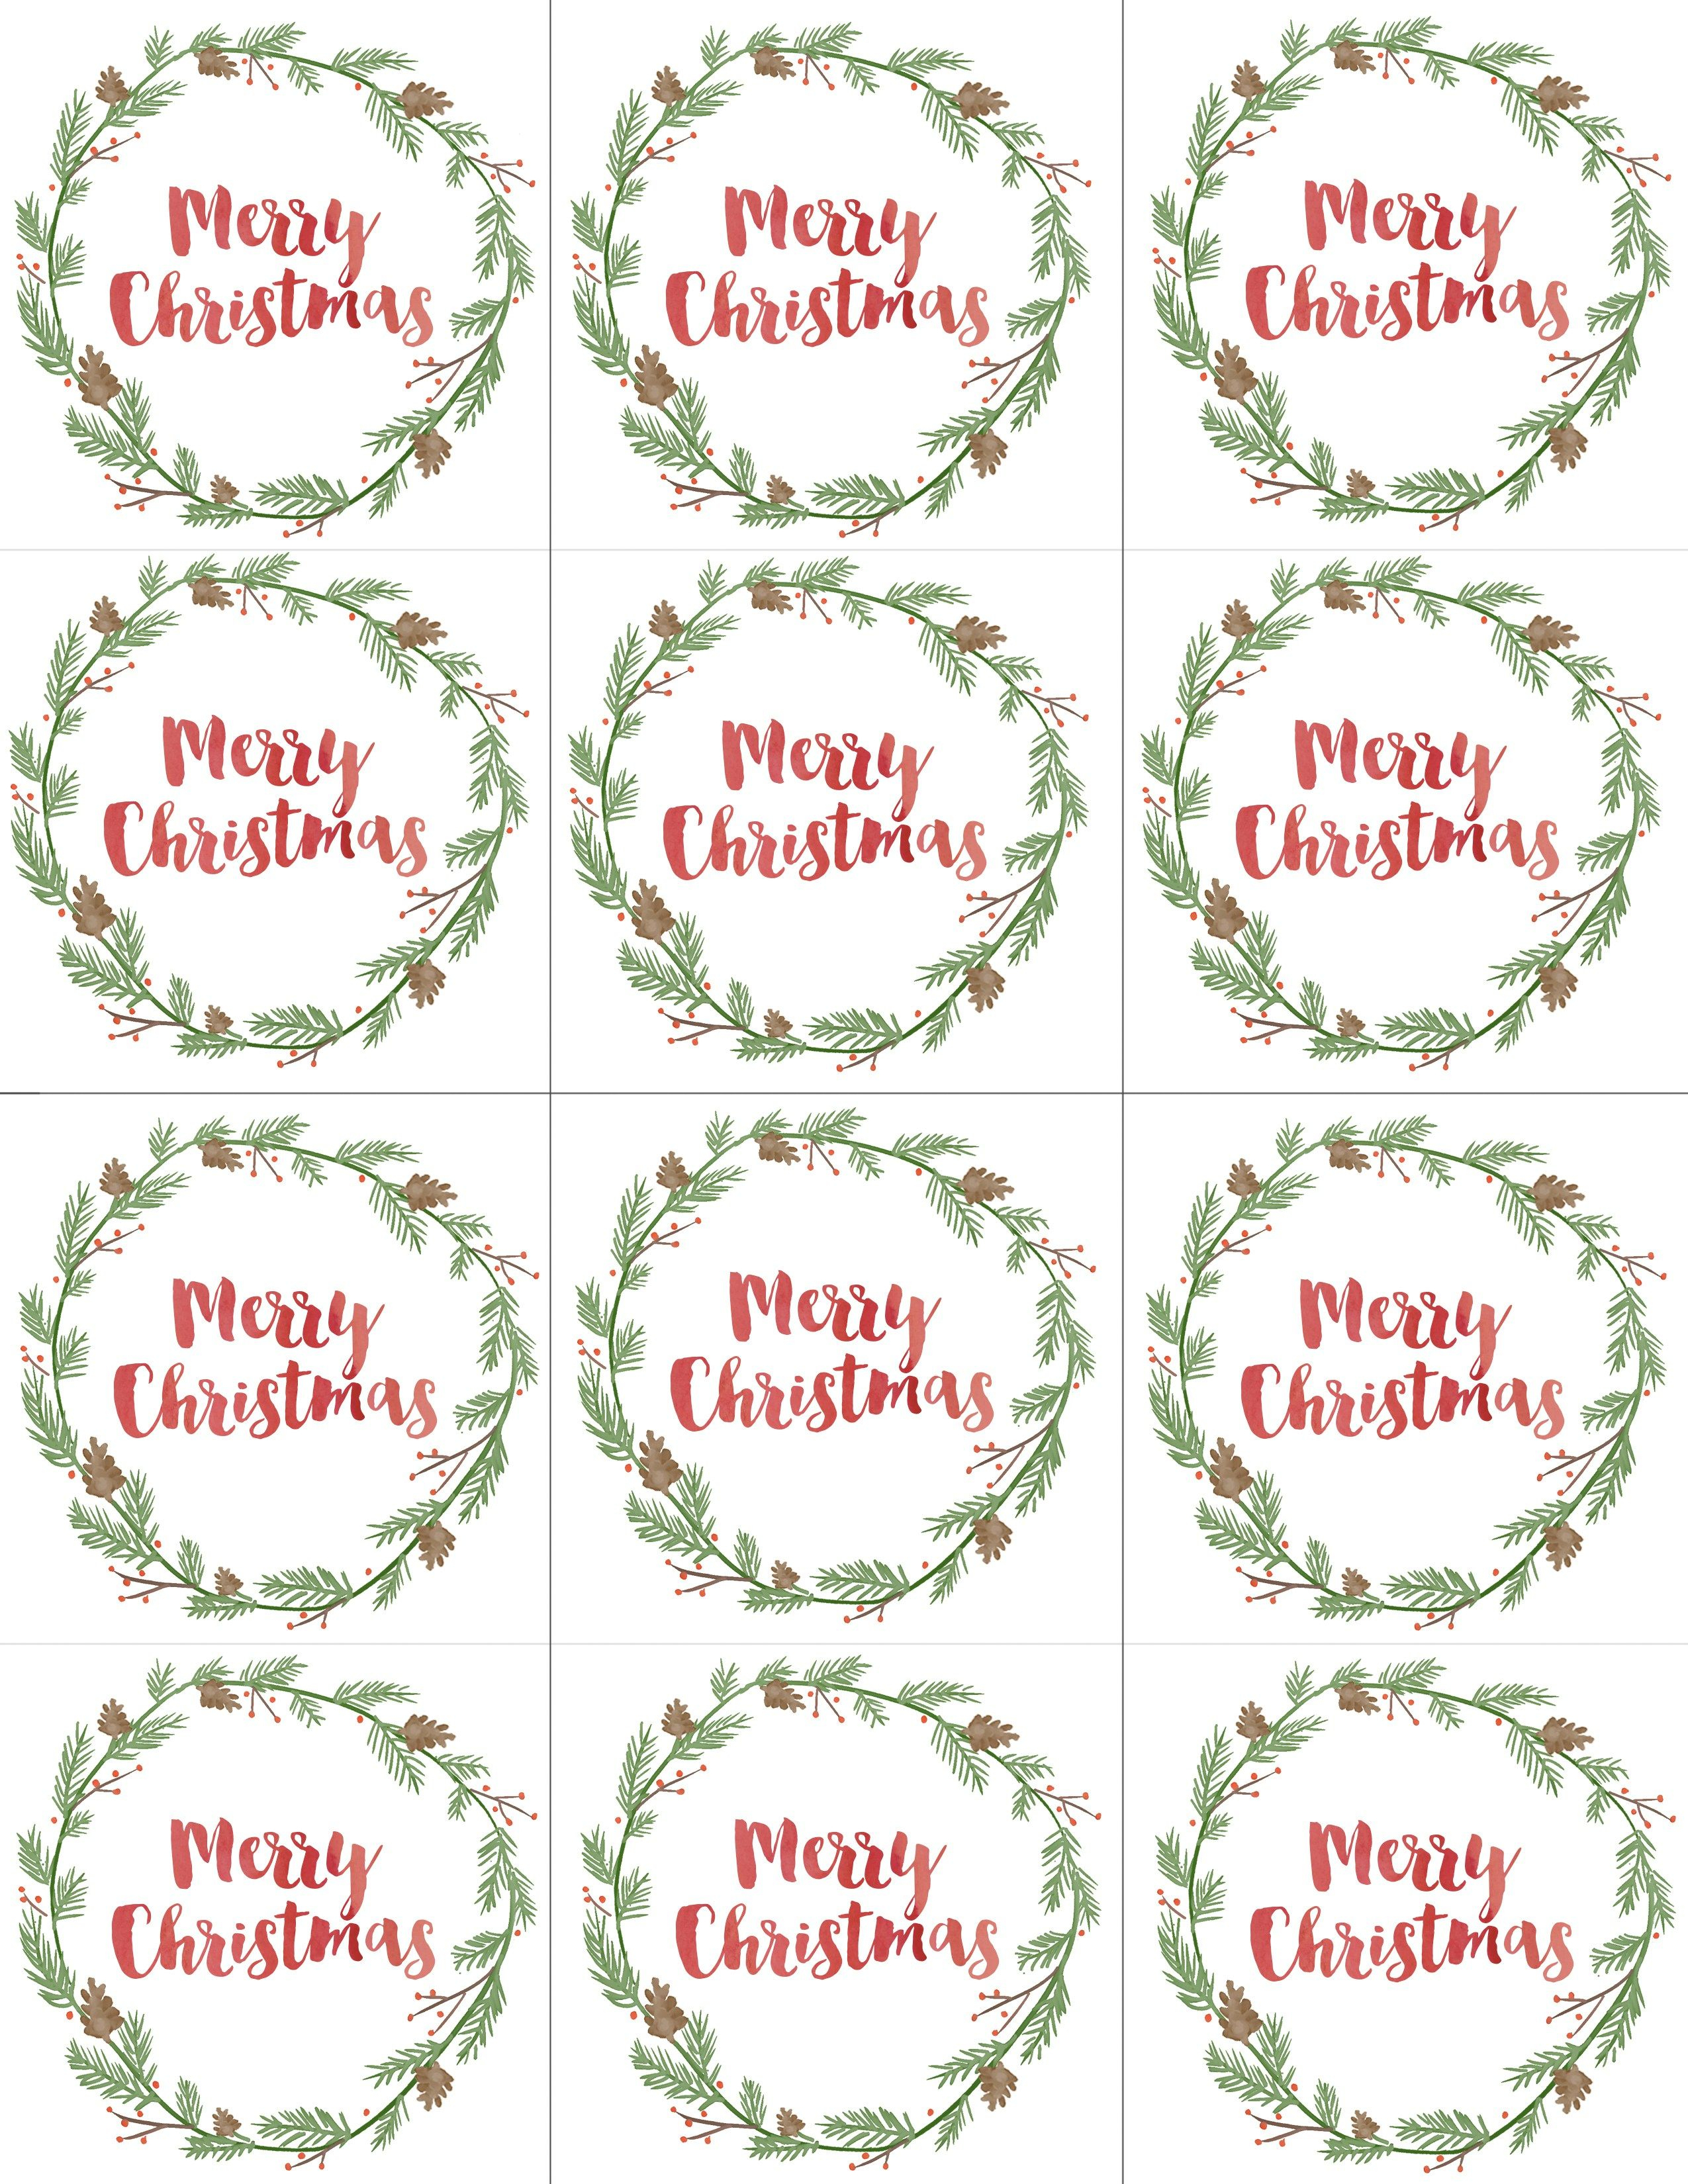 Hand Painted Gift Tags Free Printable | Christmas | Christmas Gift - Diy Gift Tags Free Printable